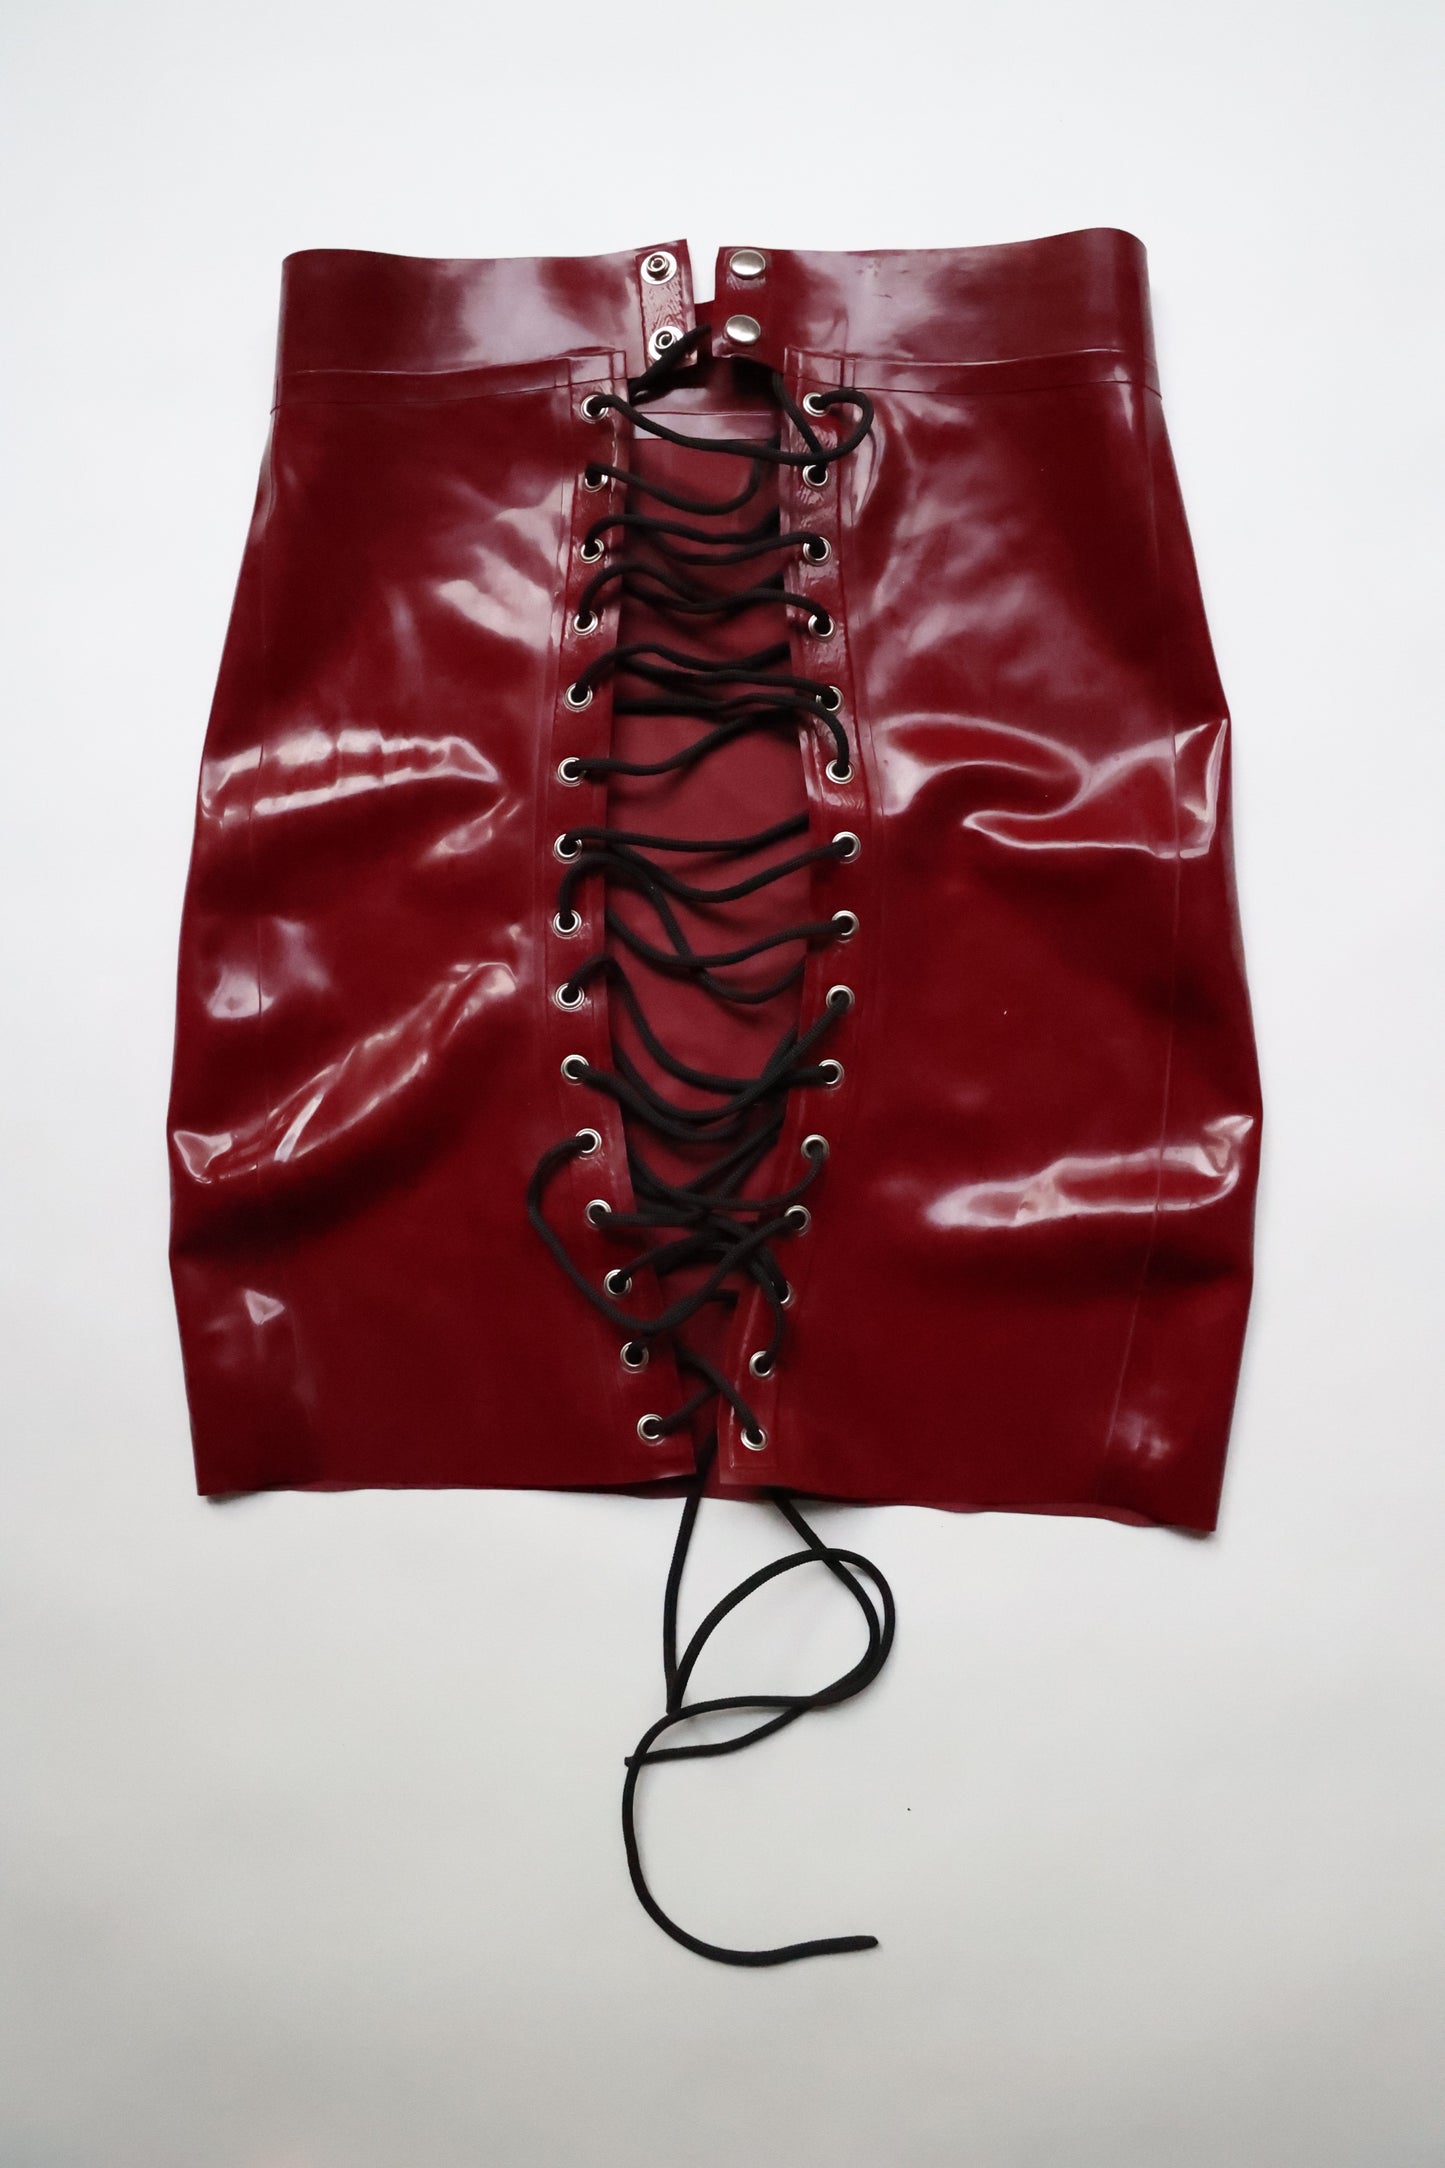 Demask Latex Two Piece Skirt Set Corset Lace Up Back - Women's XS or 2 - Plum